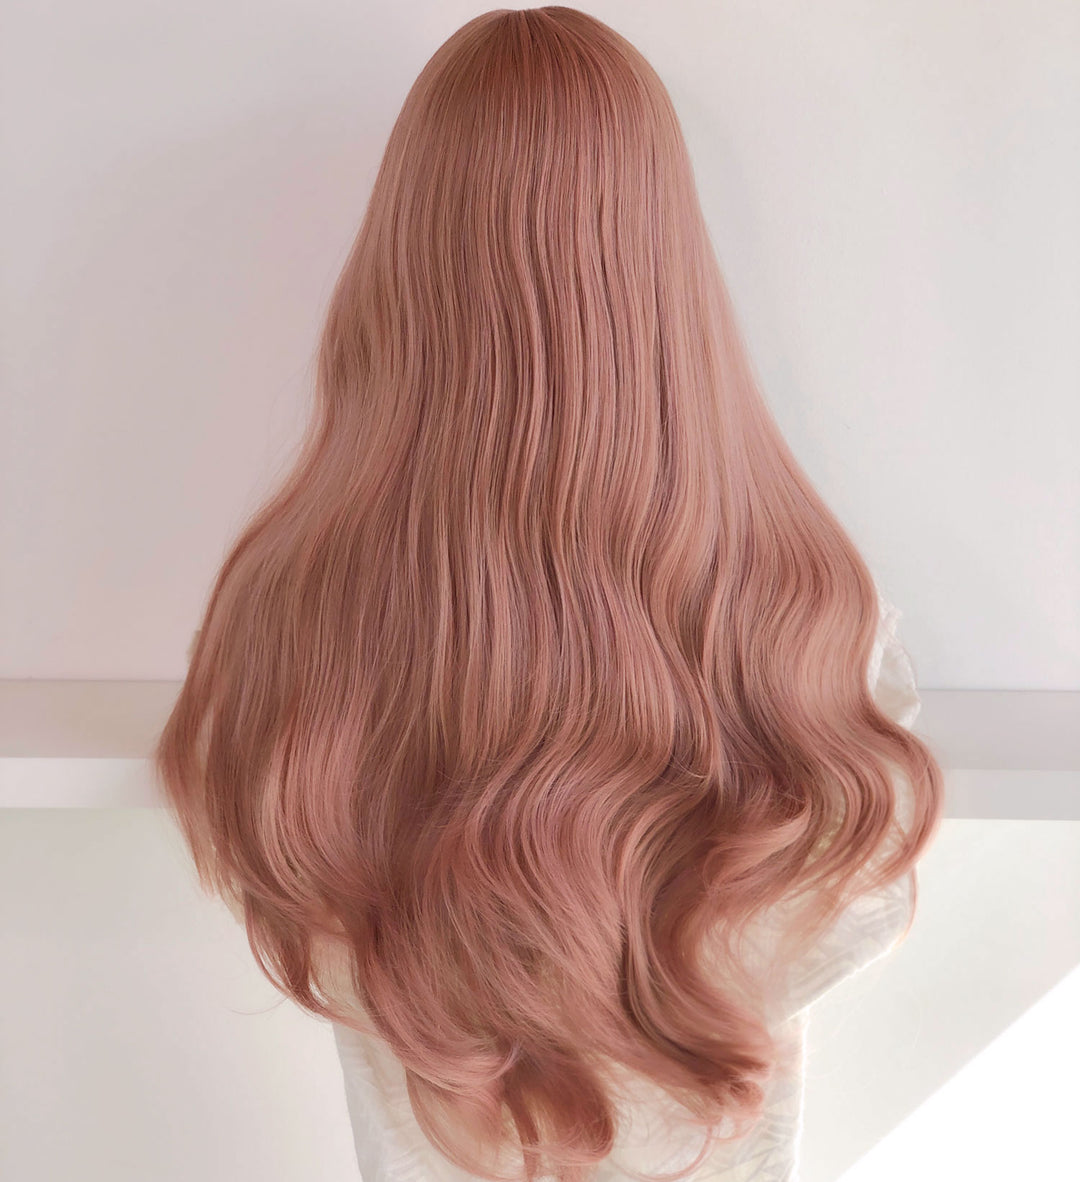 24" Ashy Pink Wig With Bangs| Jessica